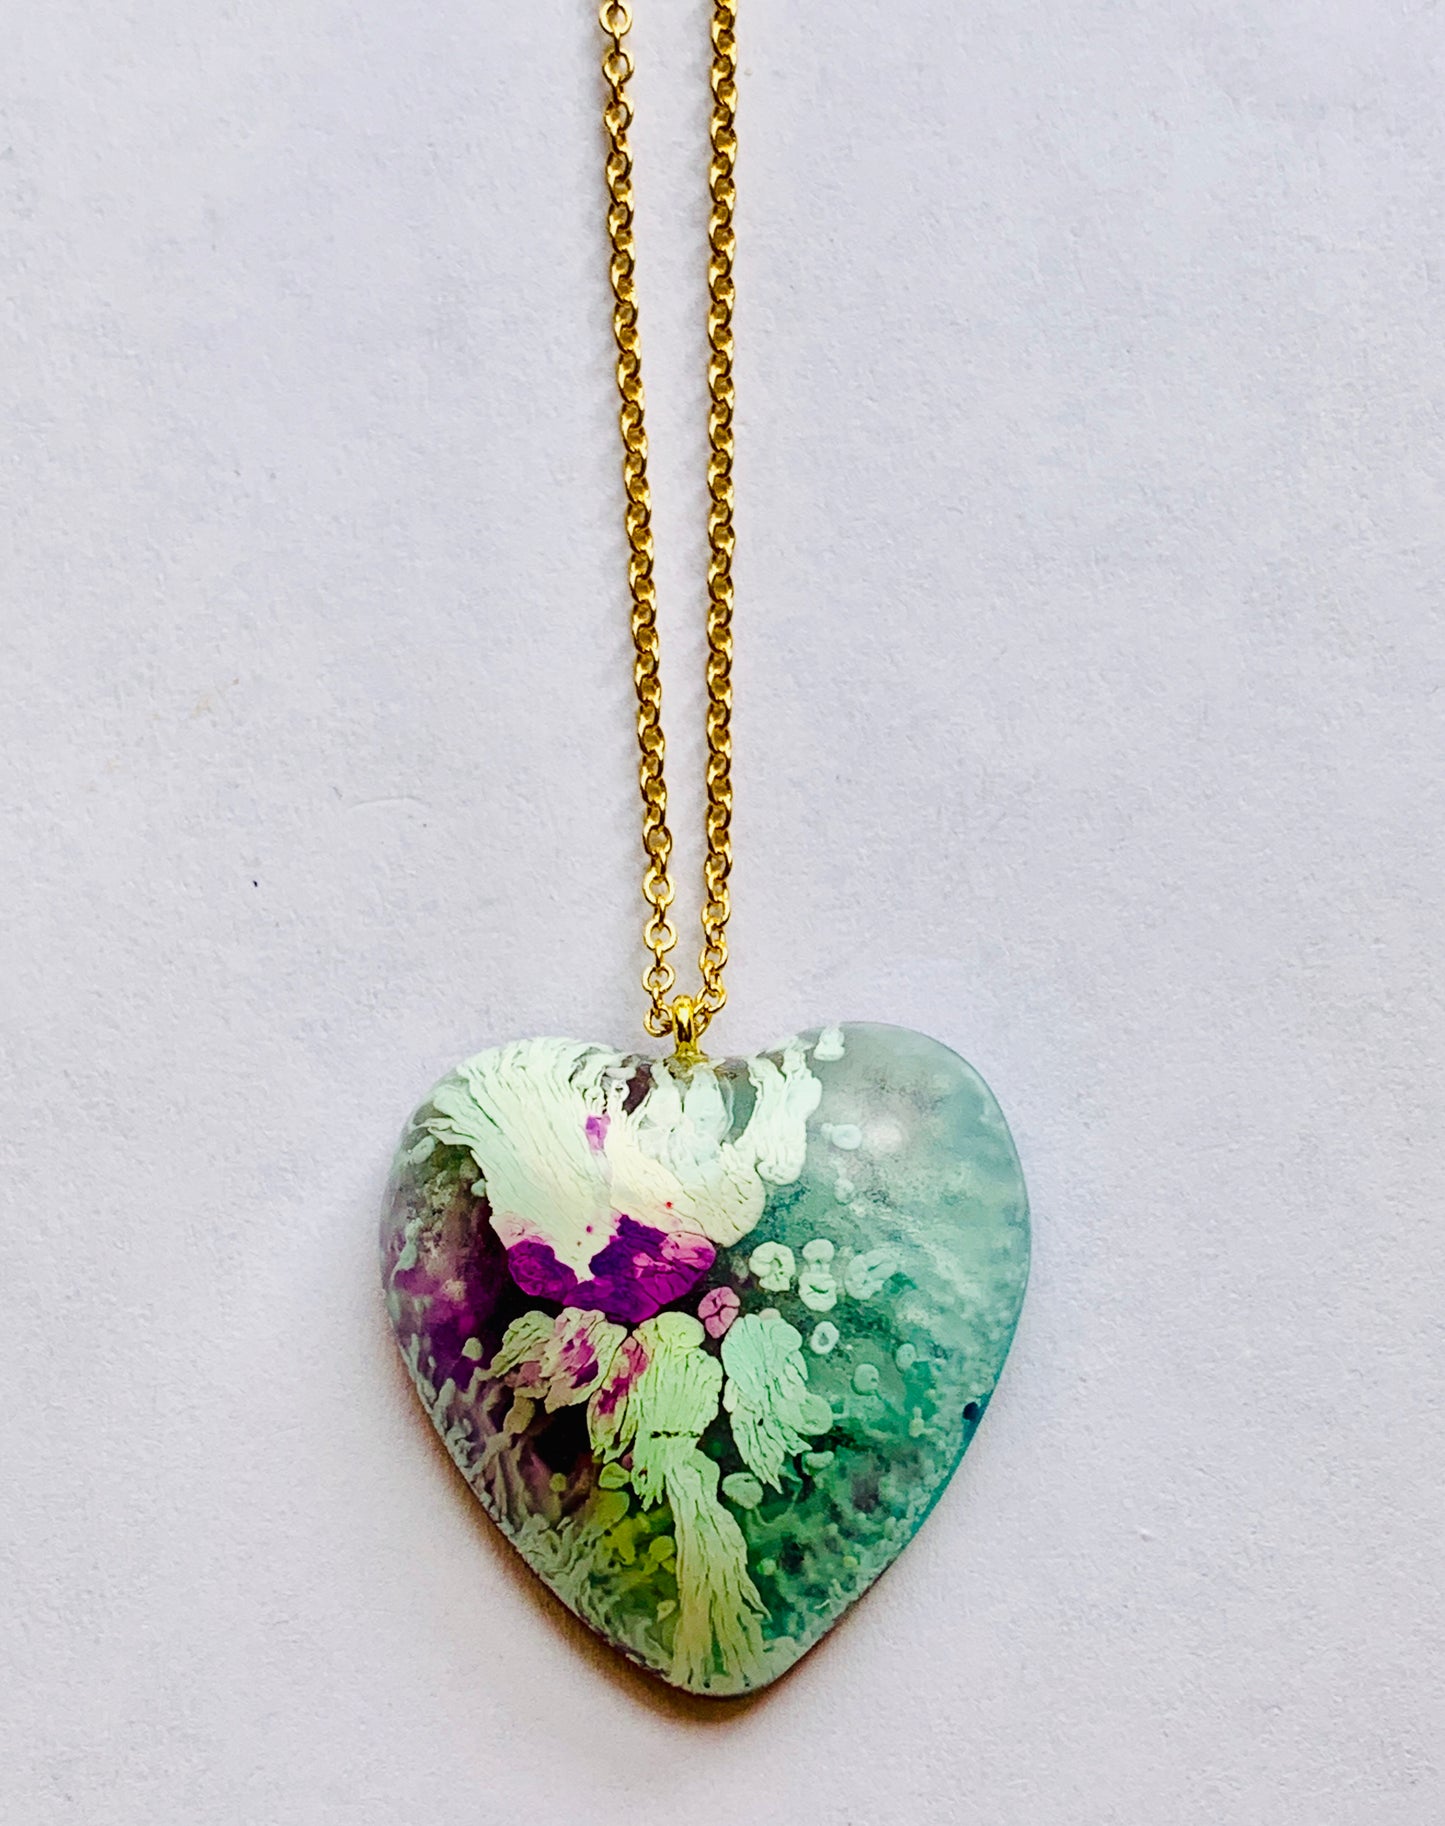 Blue Resin Heart Necklace